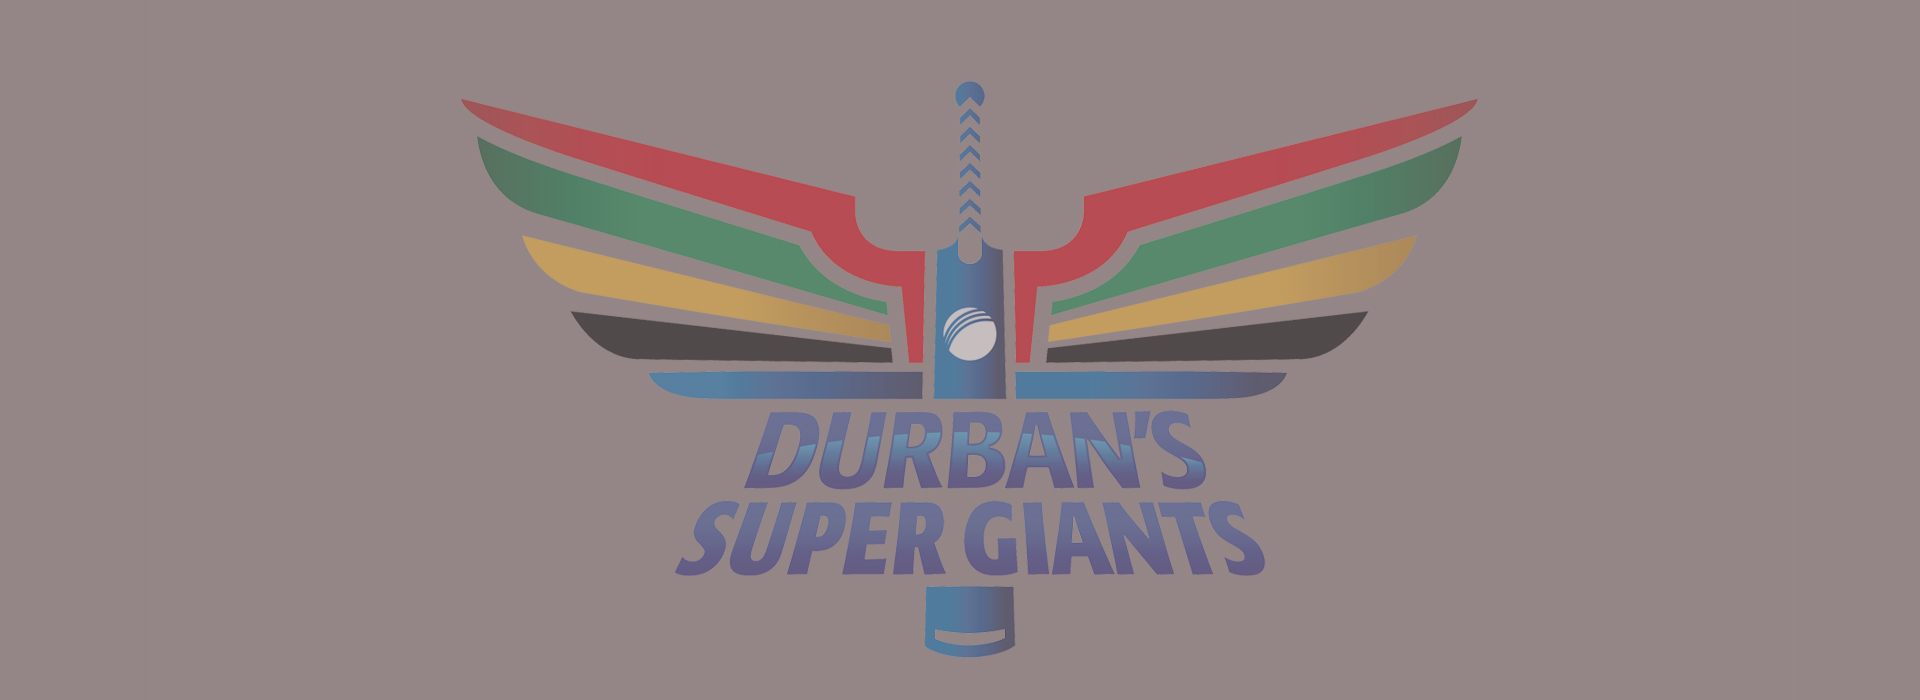 RPSG Group owns Durban's Super Giants ( DSG ) cricket team based in Durban, South Africa . The franchise was formed in 2022.